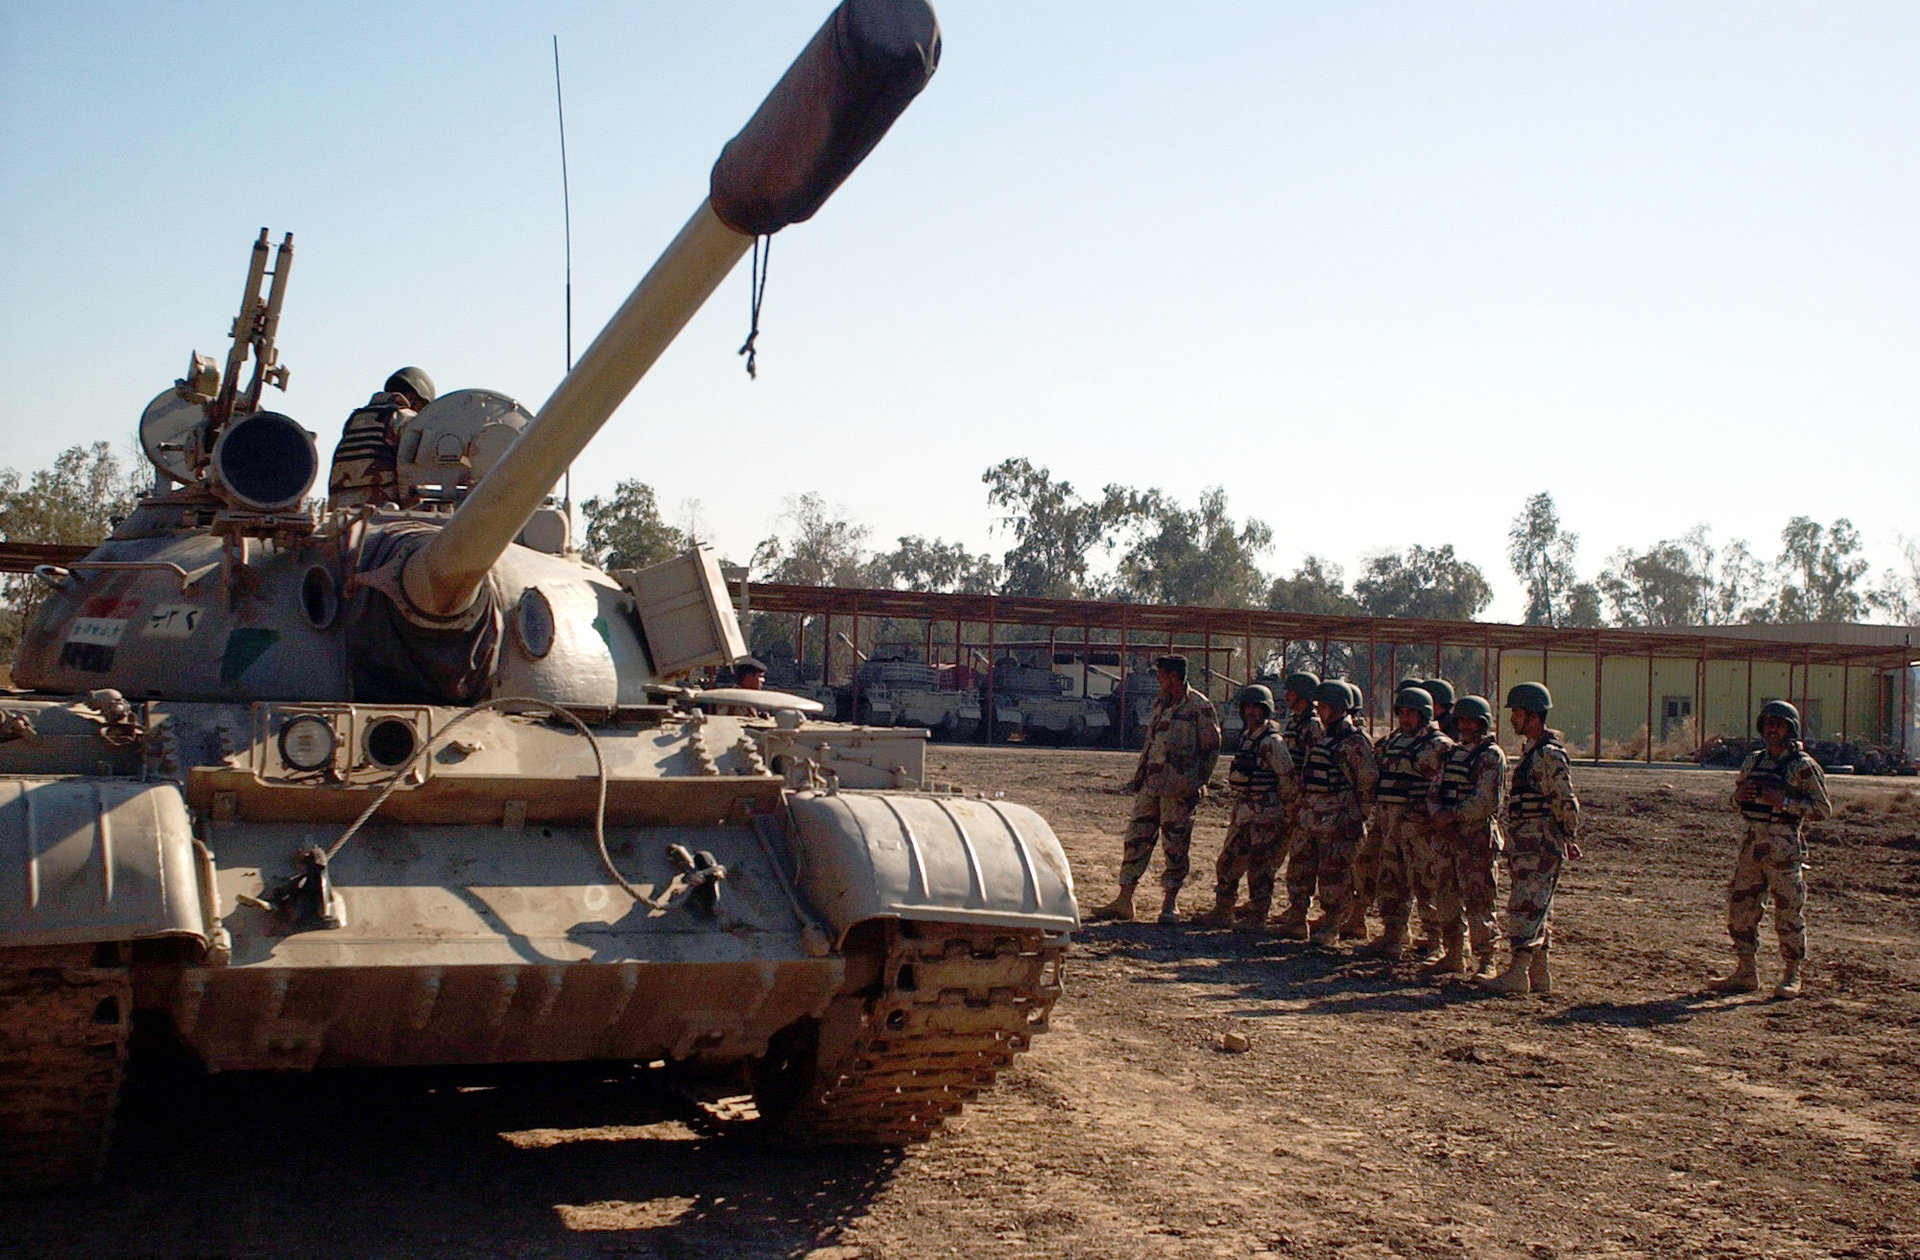 Iraqi Soldiers from the 3rd Battalion, 3rd Brigade, 9th Iraqi Army Division, many of whom are recent basic training graduates, practice crew evacuation and roll over drills during the tank driving portion of a round robin exercise at Camp Taji, Iraq on January 24, 2007. (U.S. Army photo by Sergeant Jeffrey Alexander) (Released)